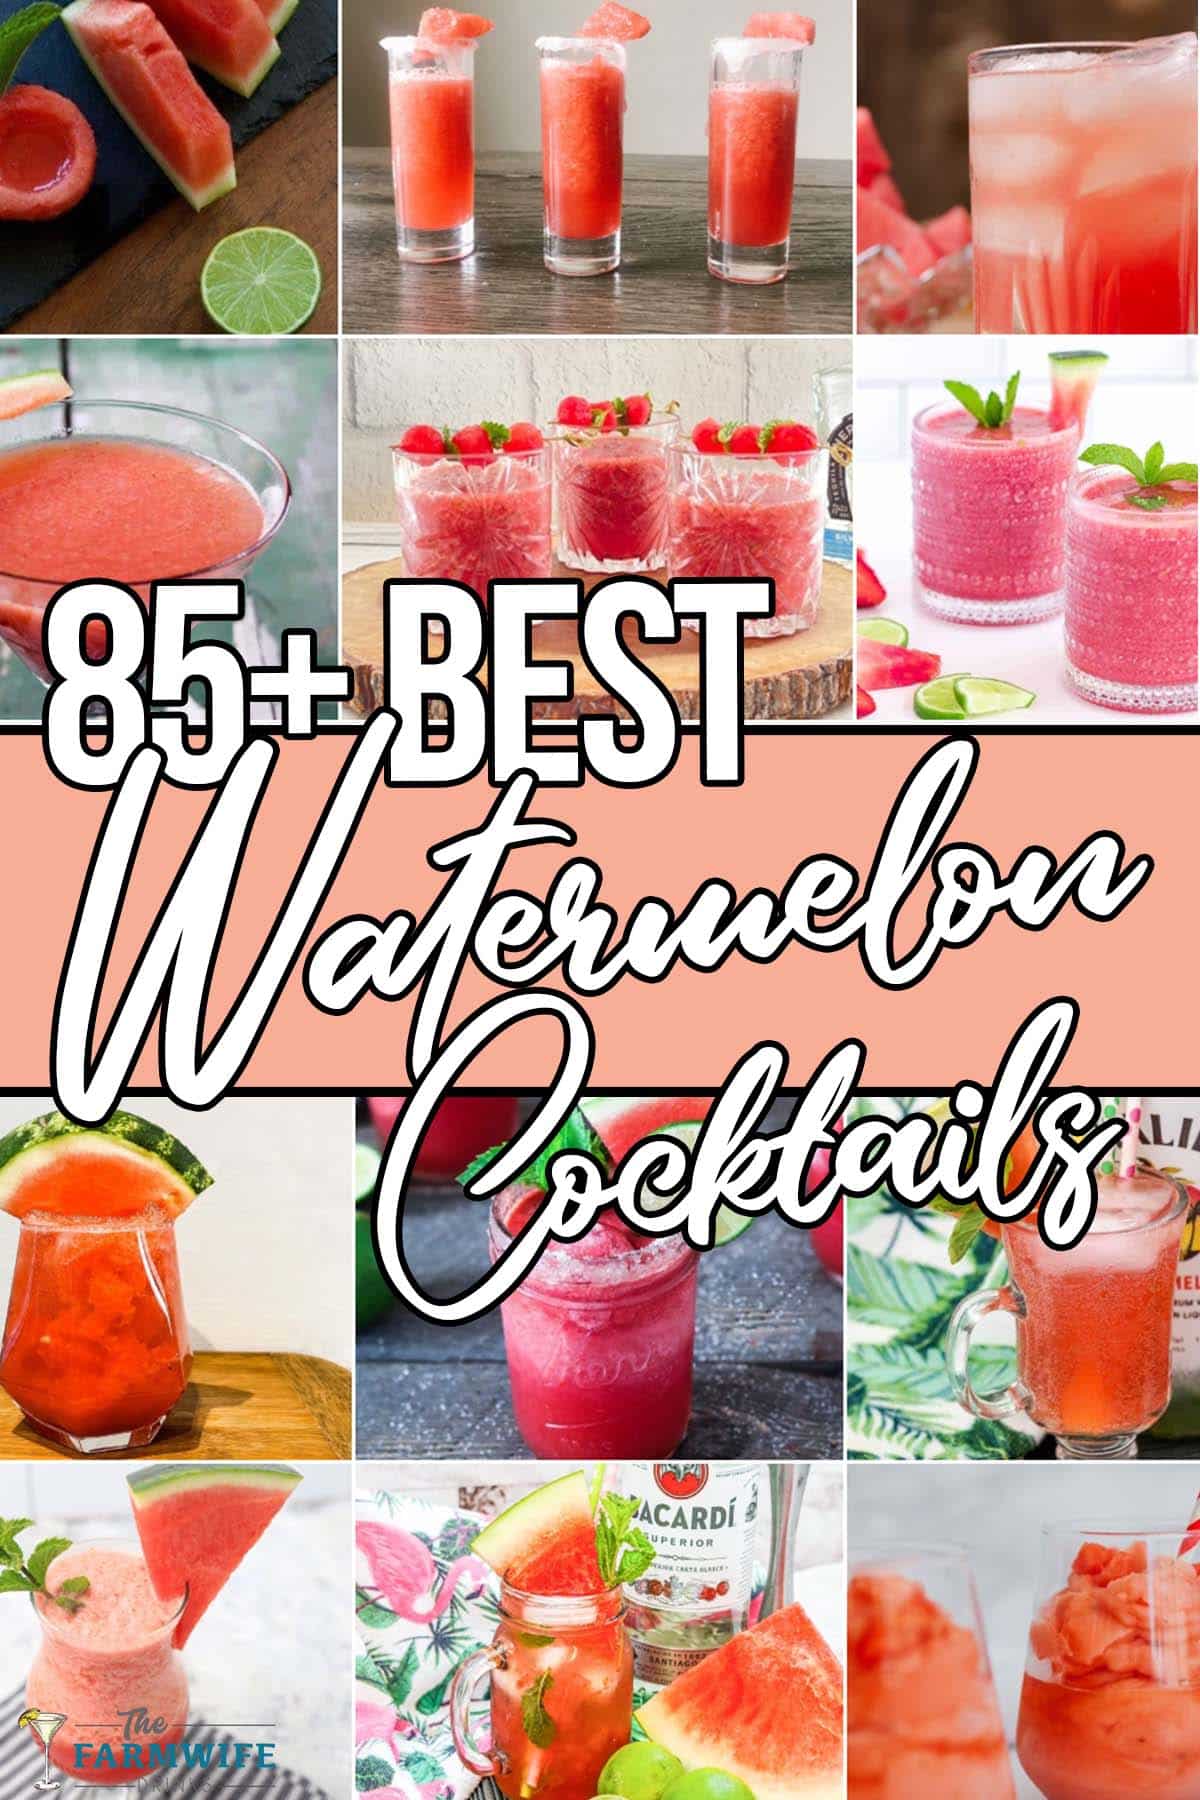 photo collage of watermelon drink ideas with text which reads 85+ best watermelon cocktails